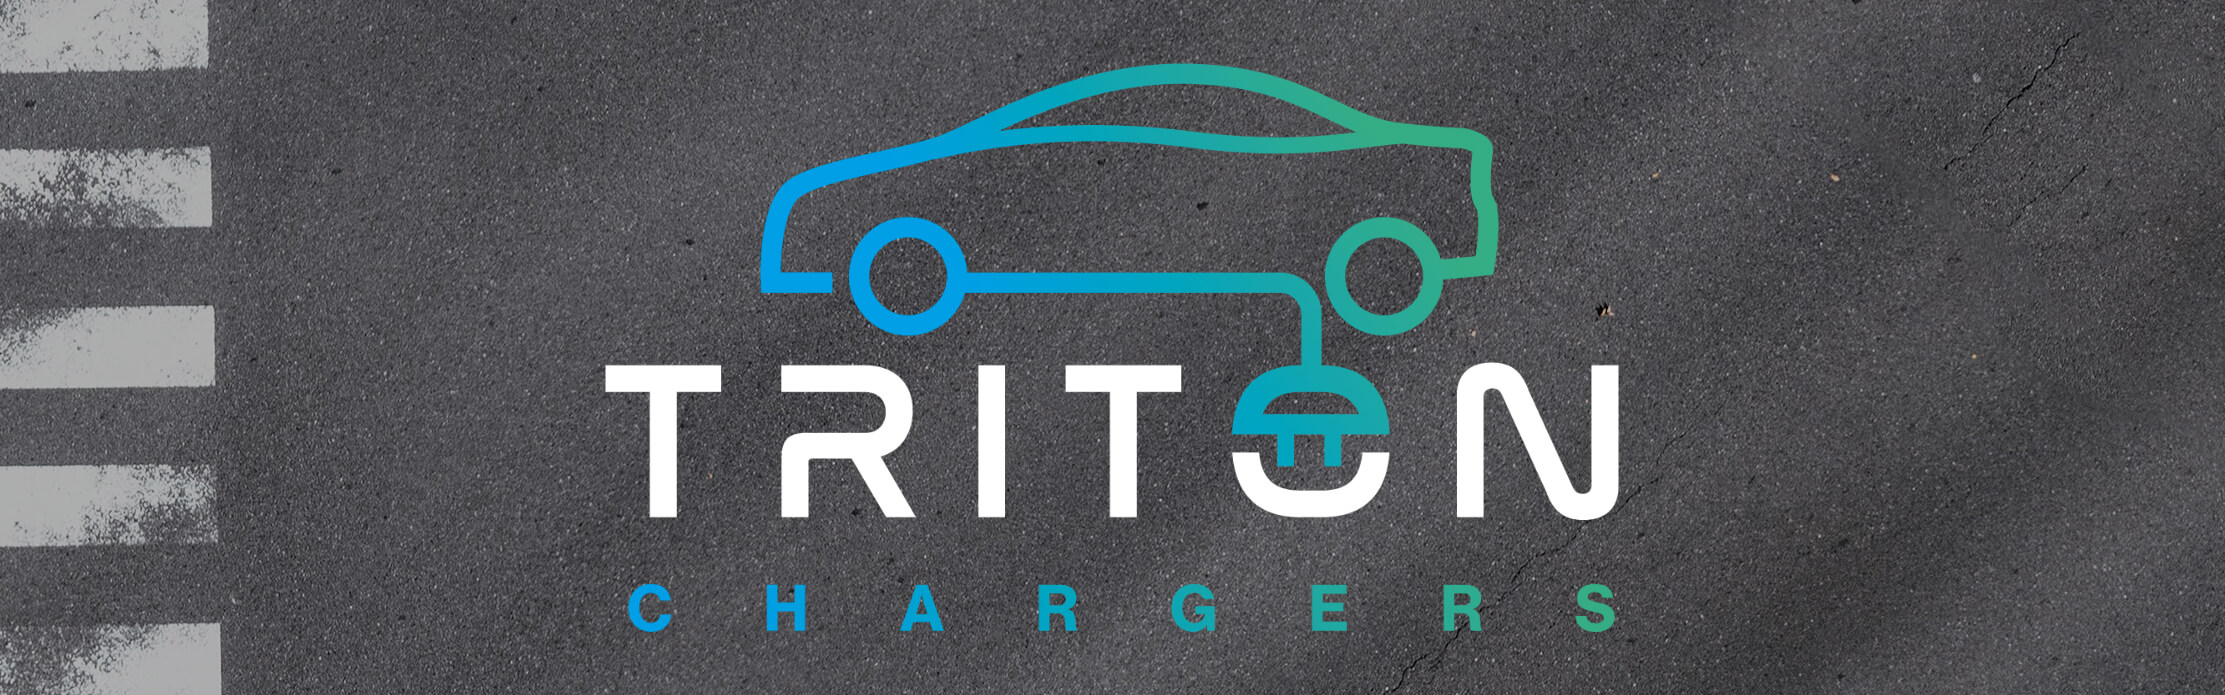 Logo of Triton Chargers against a background of asphault